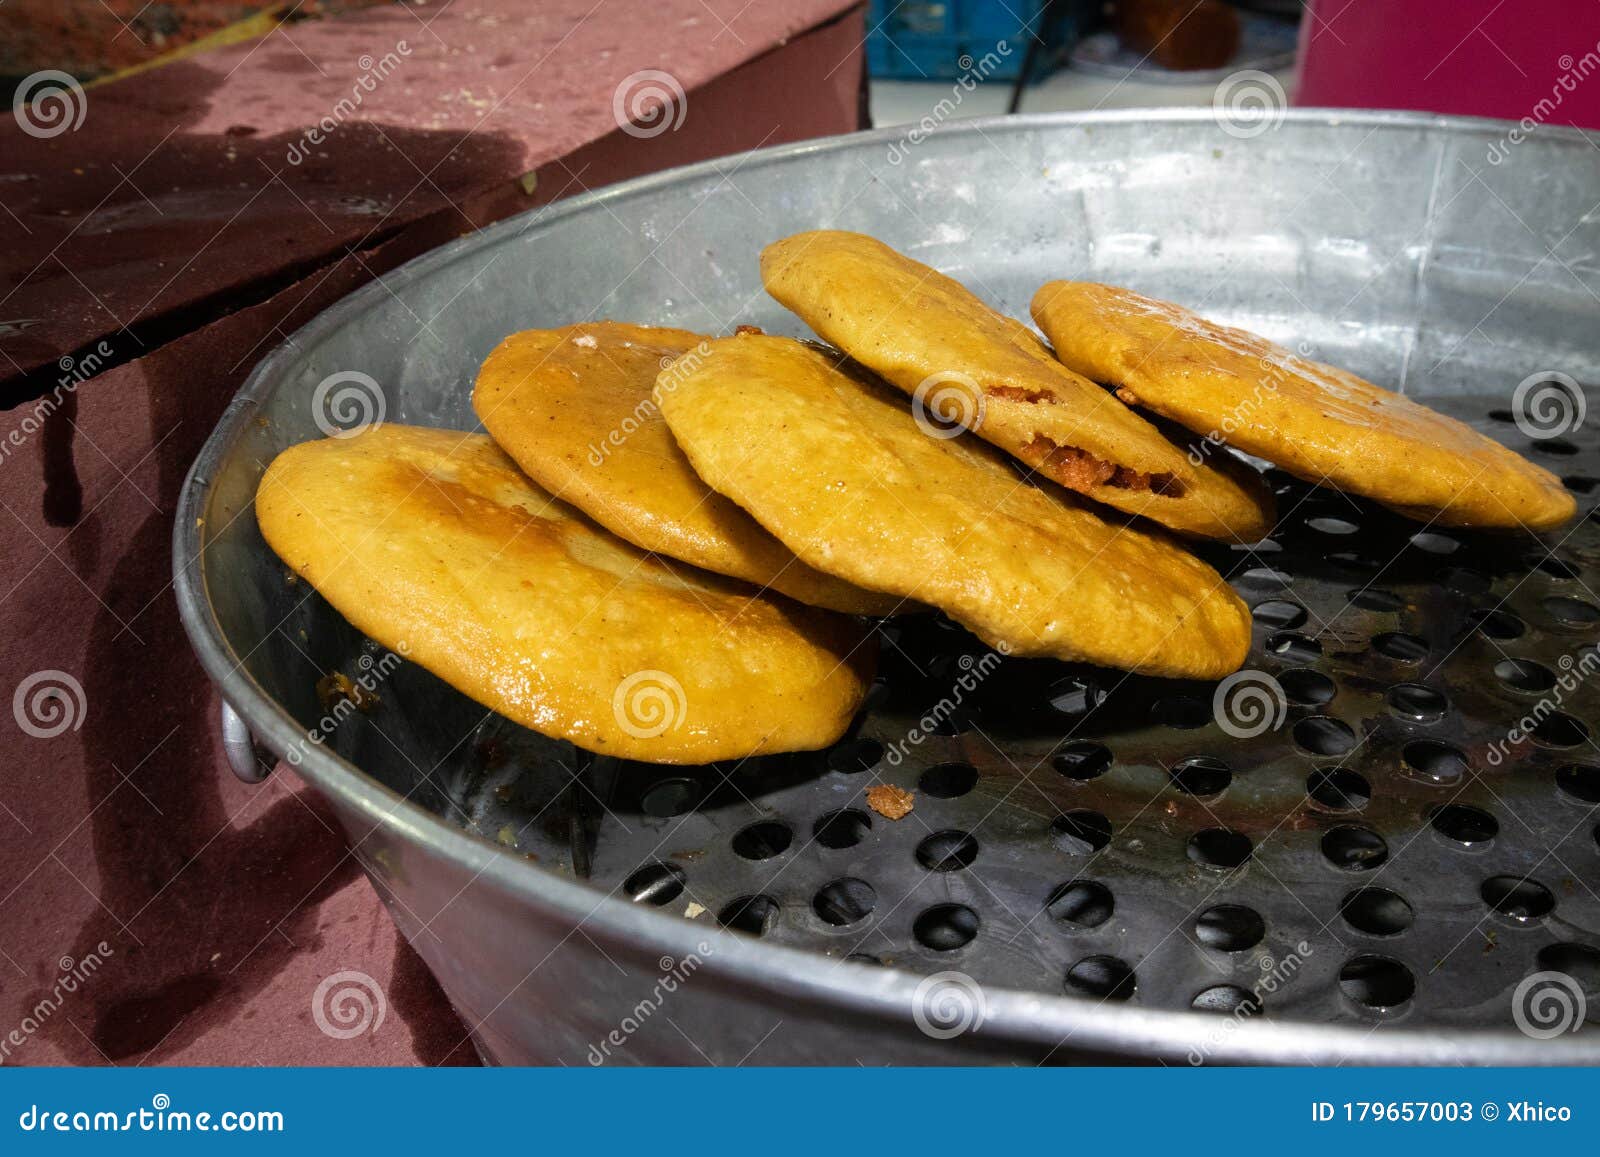 deep fried traditional gorditas in mexico city